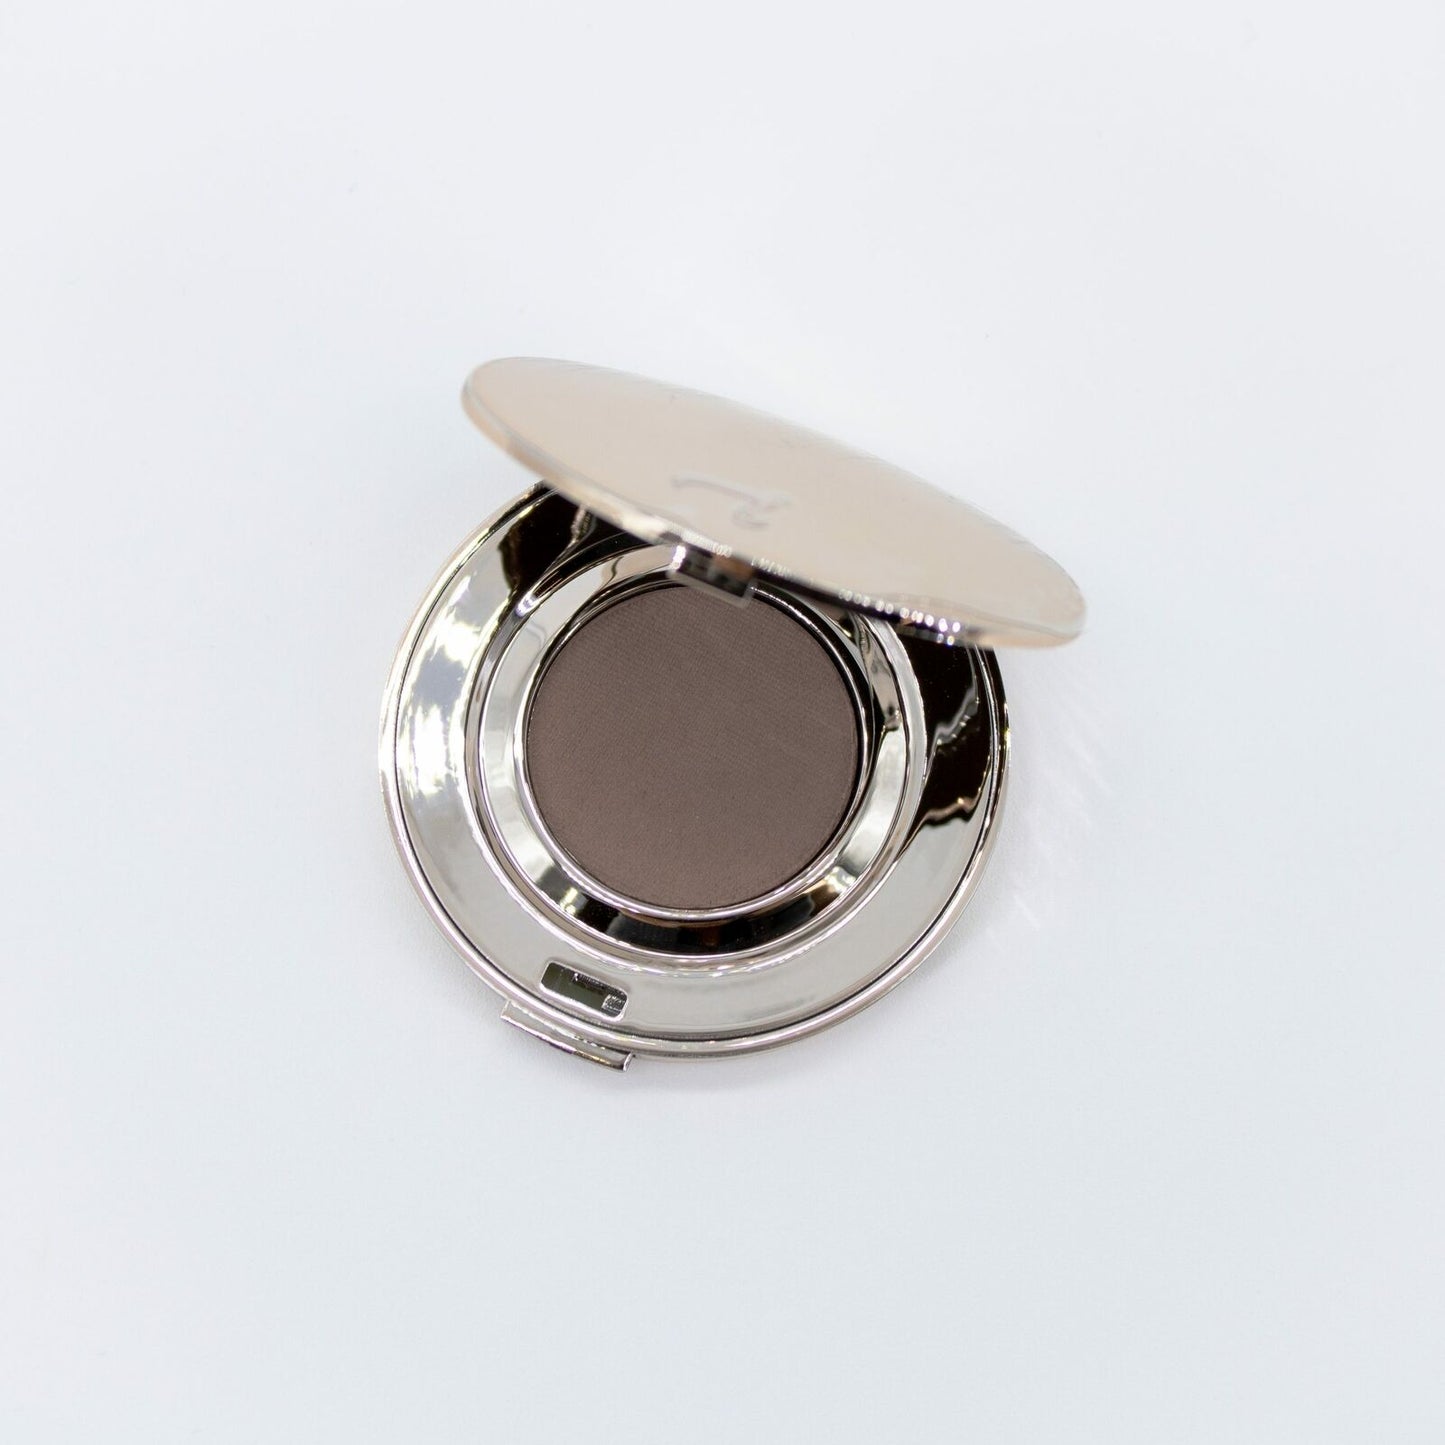 Jane Iredale Pure Pressed Eye Shadow Shade Taupe .06oz - Imperfect Box